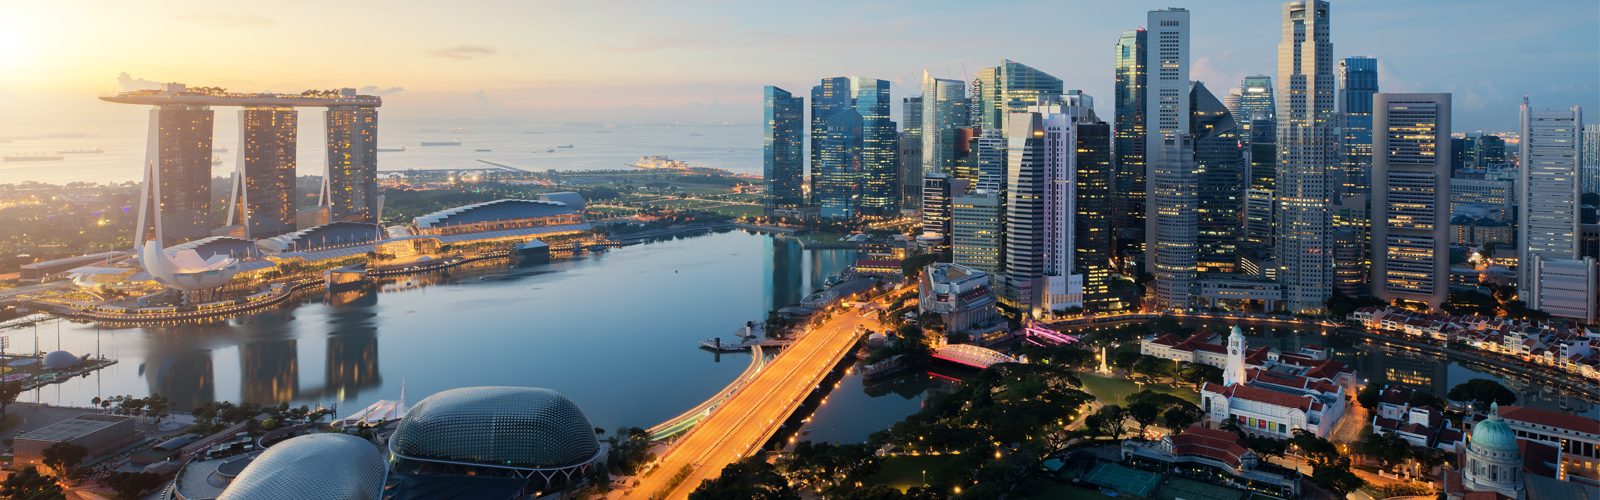 Top 10 Things To Do In Singapore | Luxury Holidays | Pure Destinations